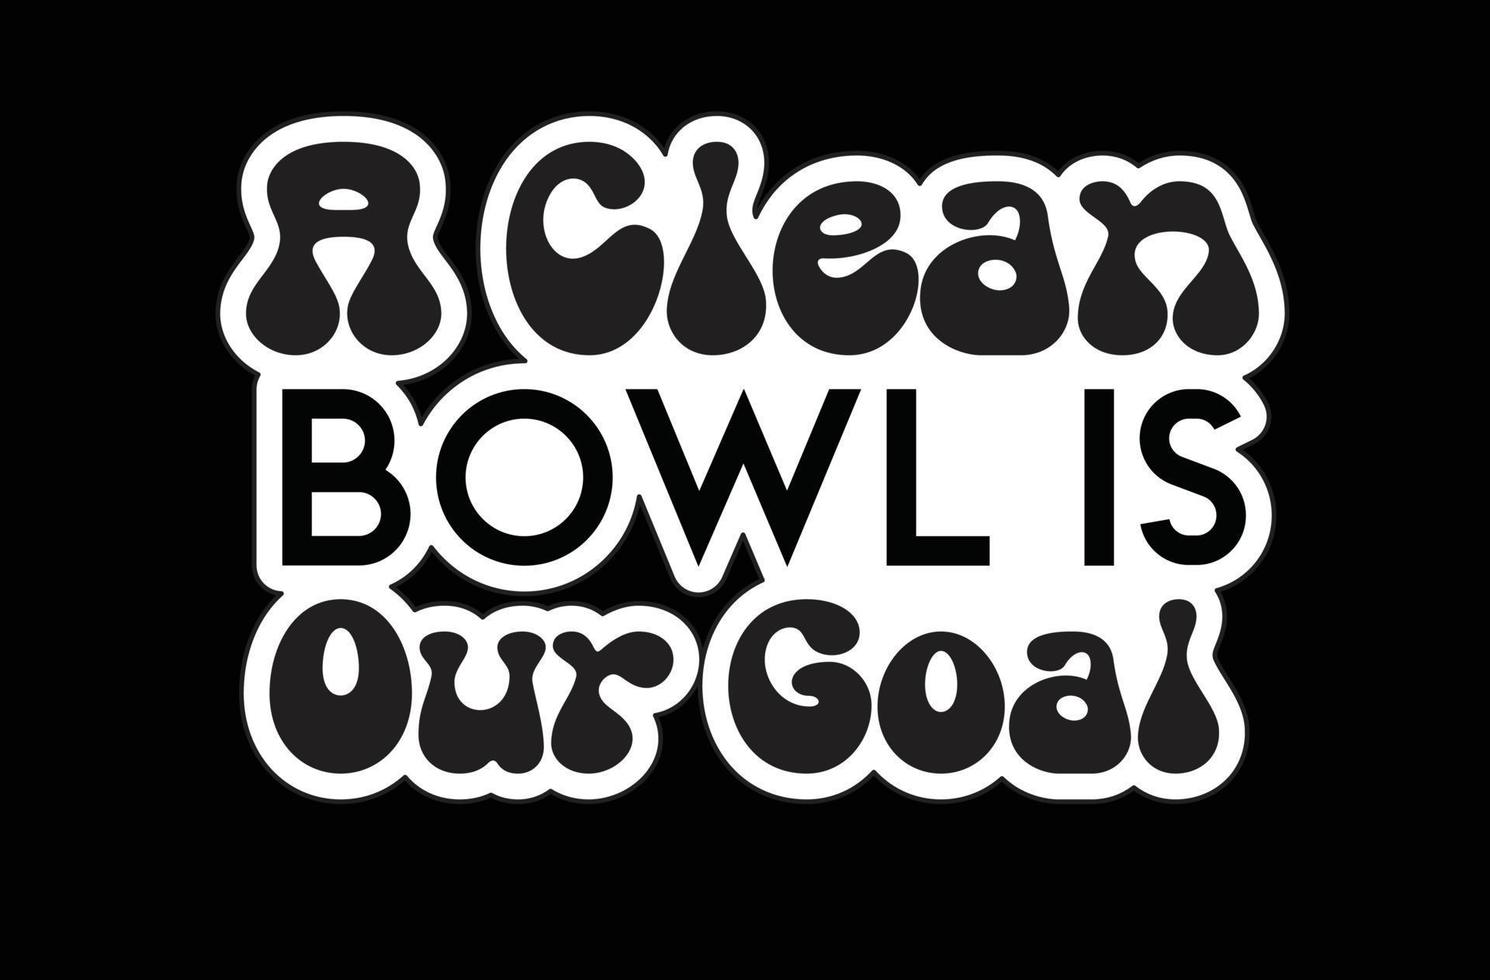 A Clean Bowl is Our Goal svg sticker design vector